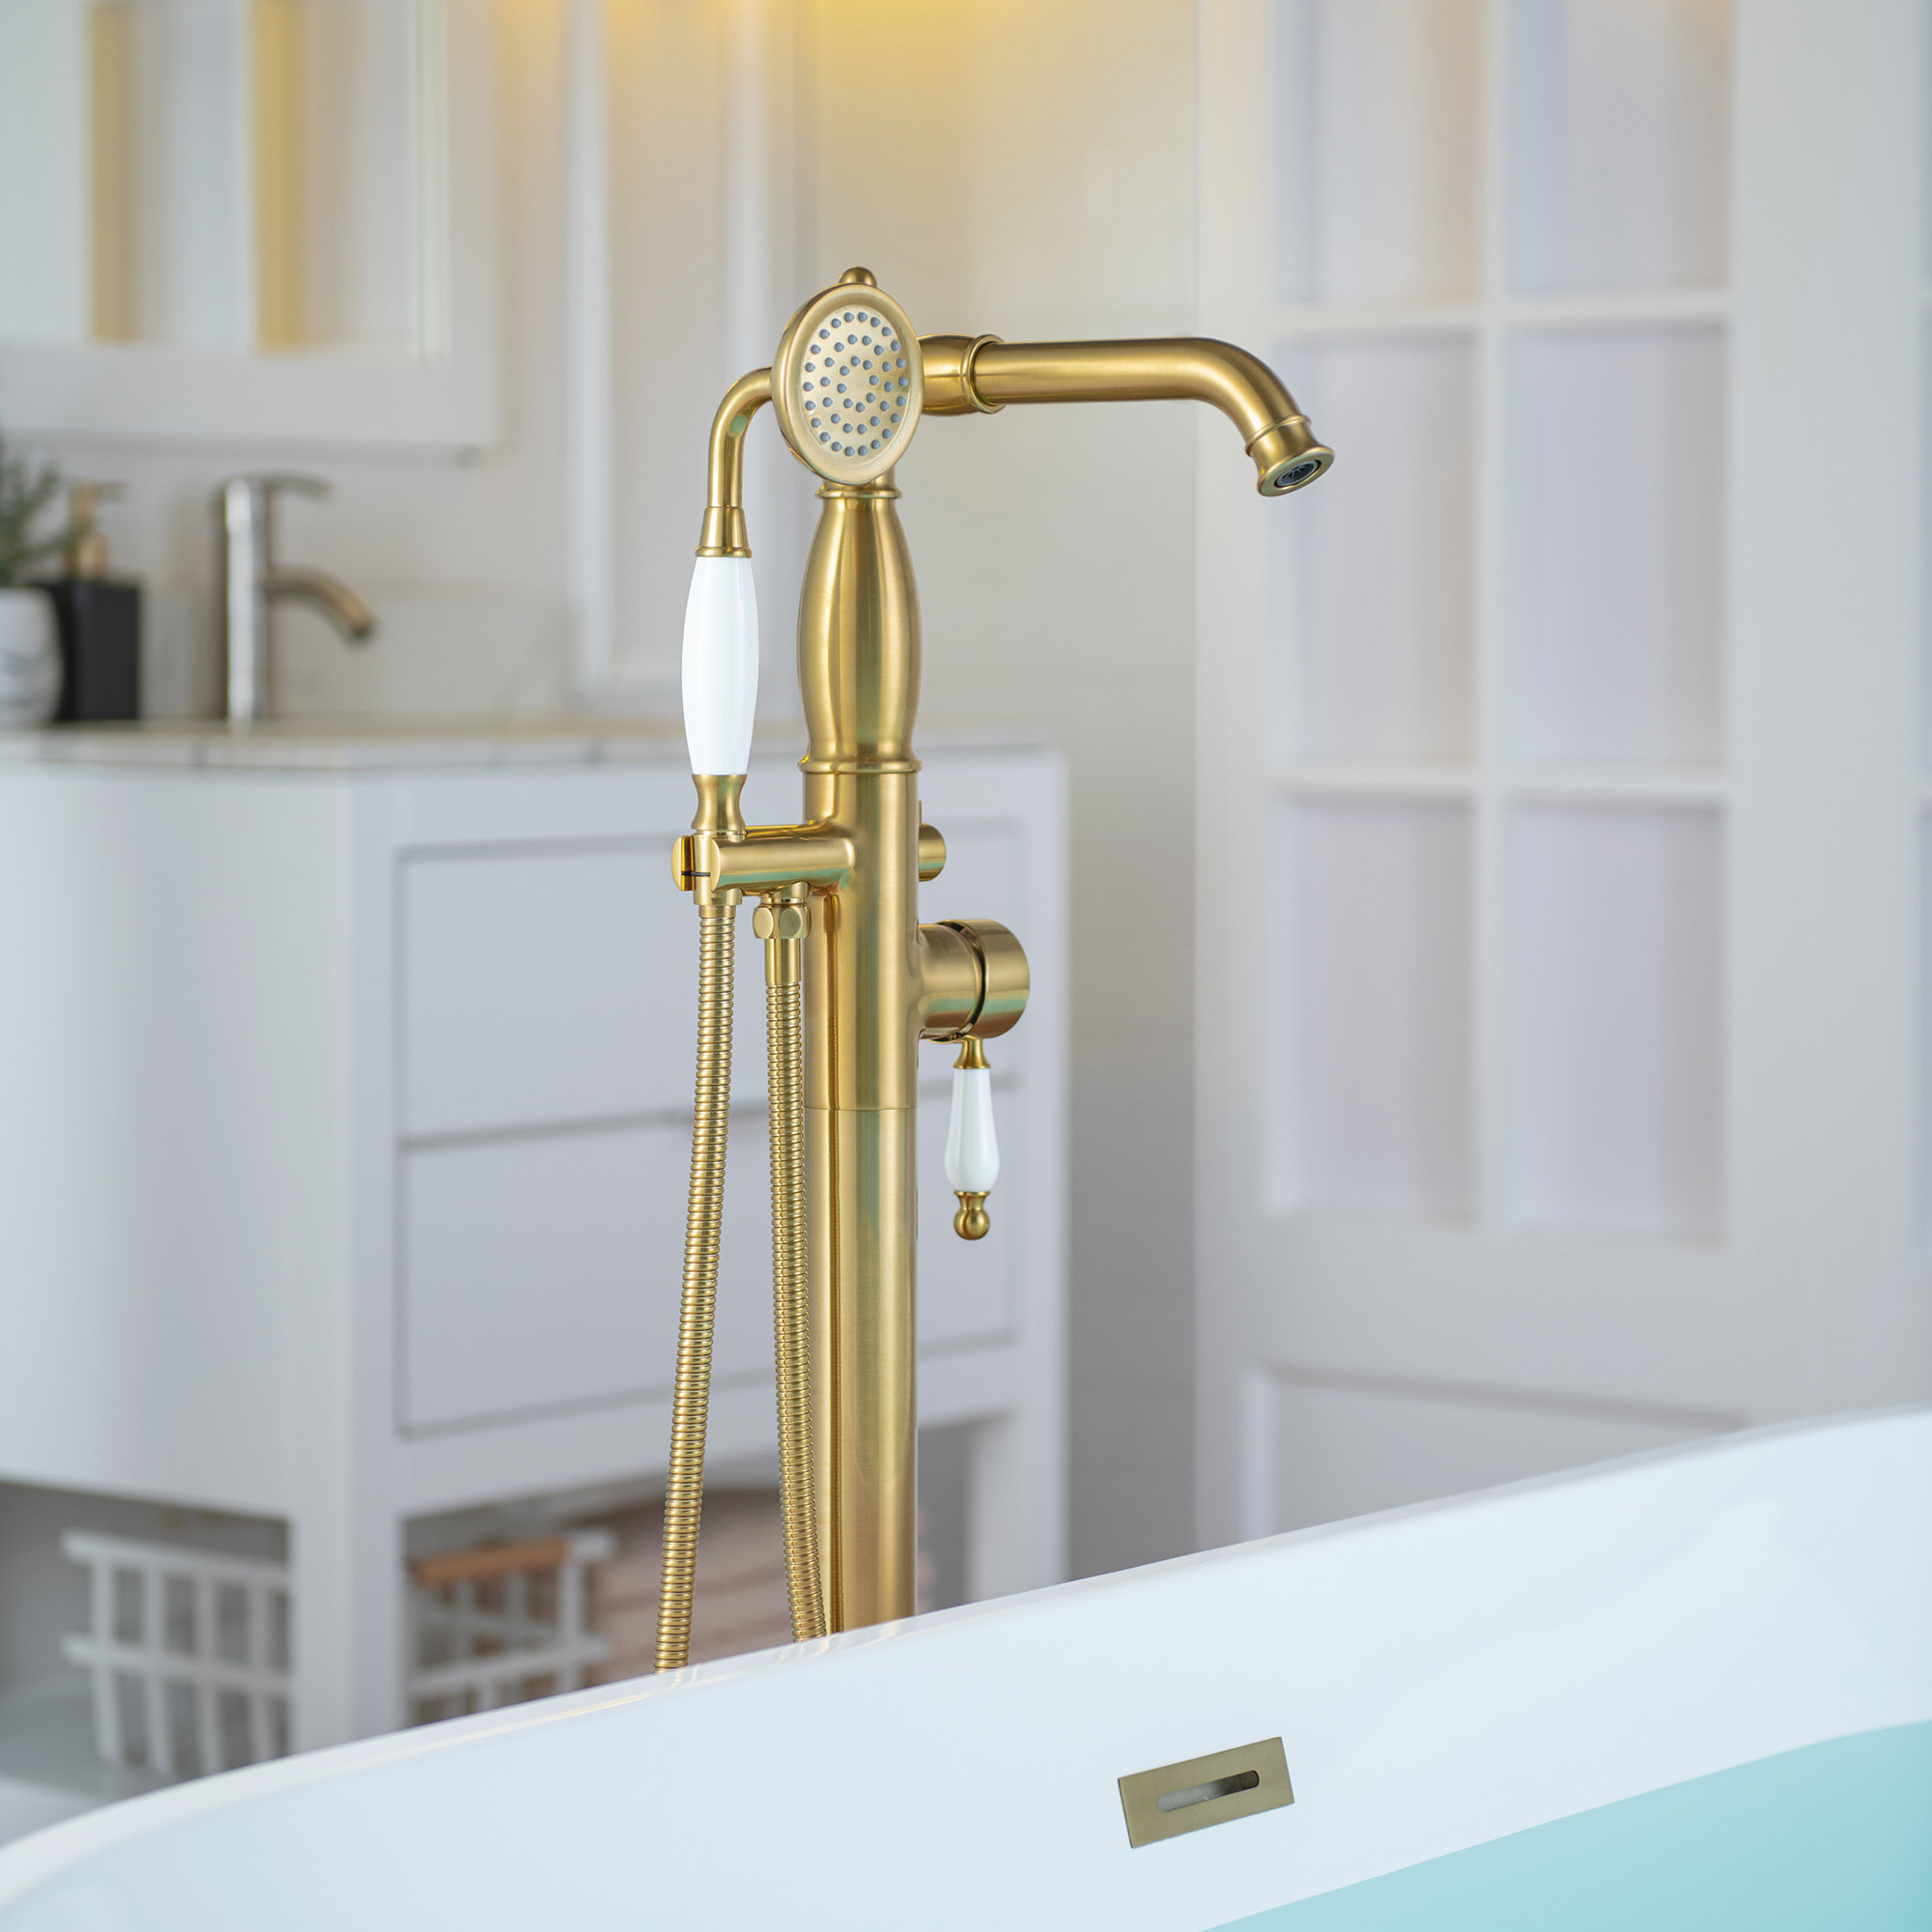  WOODBRIDGE F0050BG Fusion Single Handle Floor Mount Freestanding Tub Filler Faucet with Telephone Hand shower in Polished Gold Finis_12285